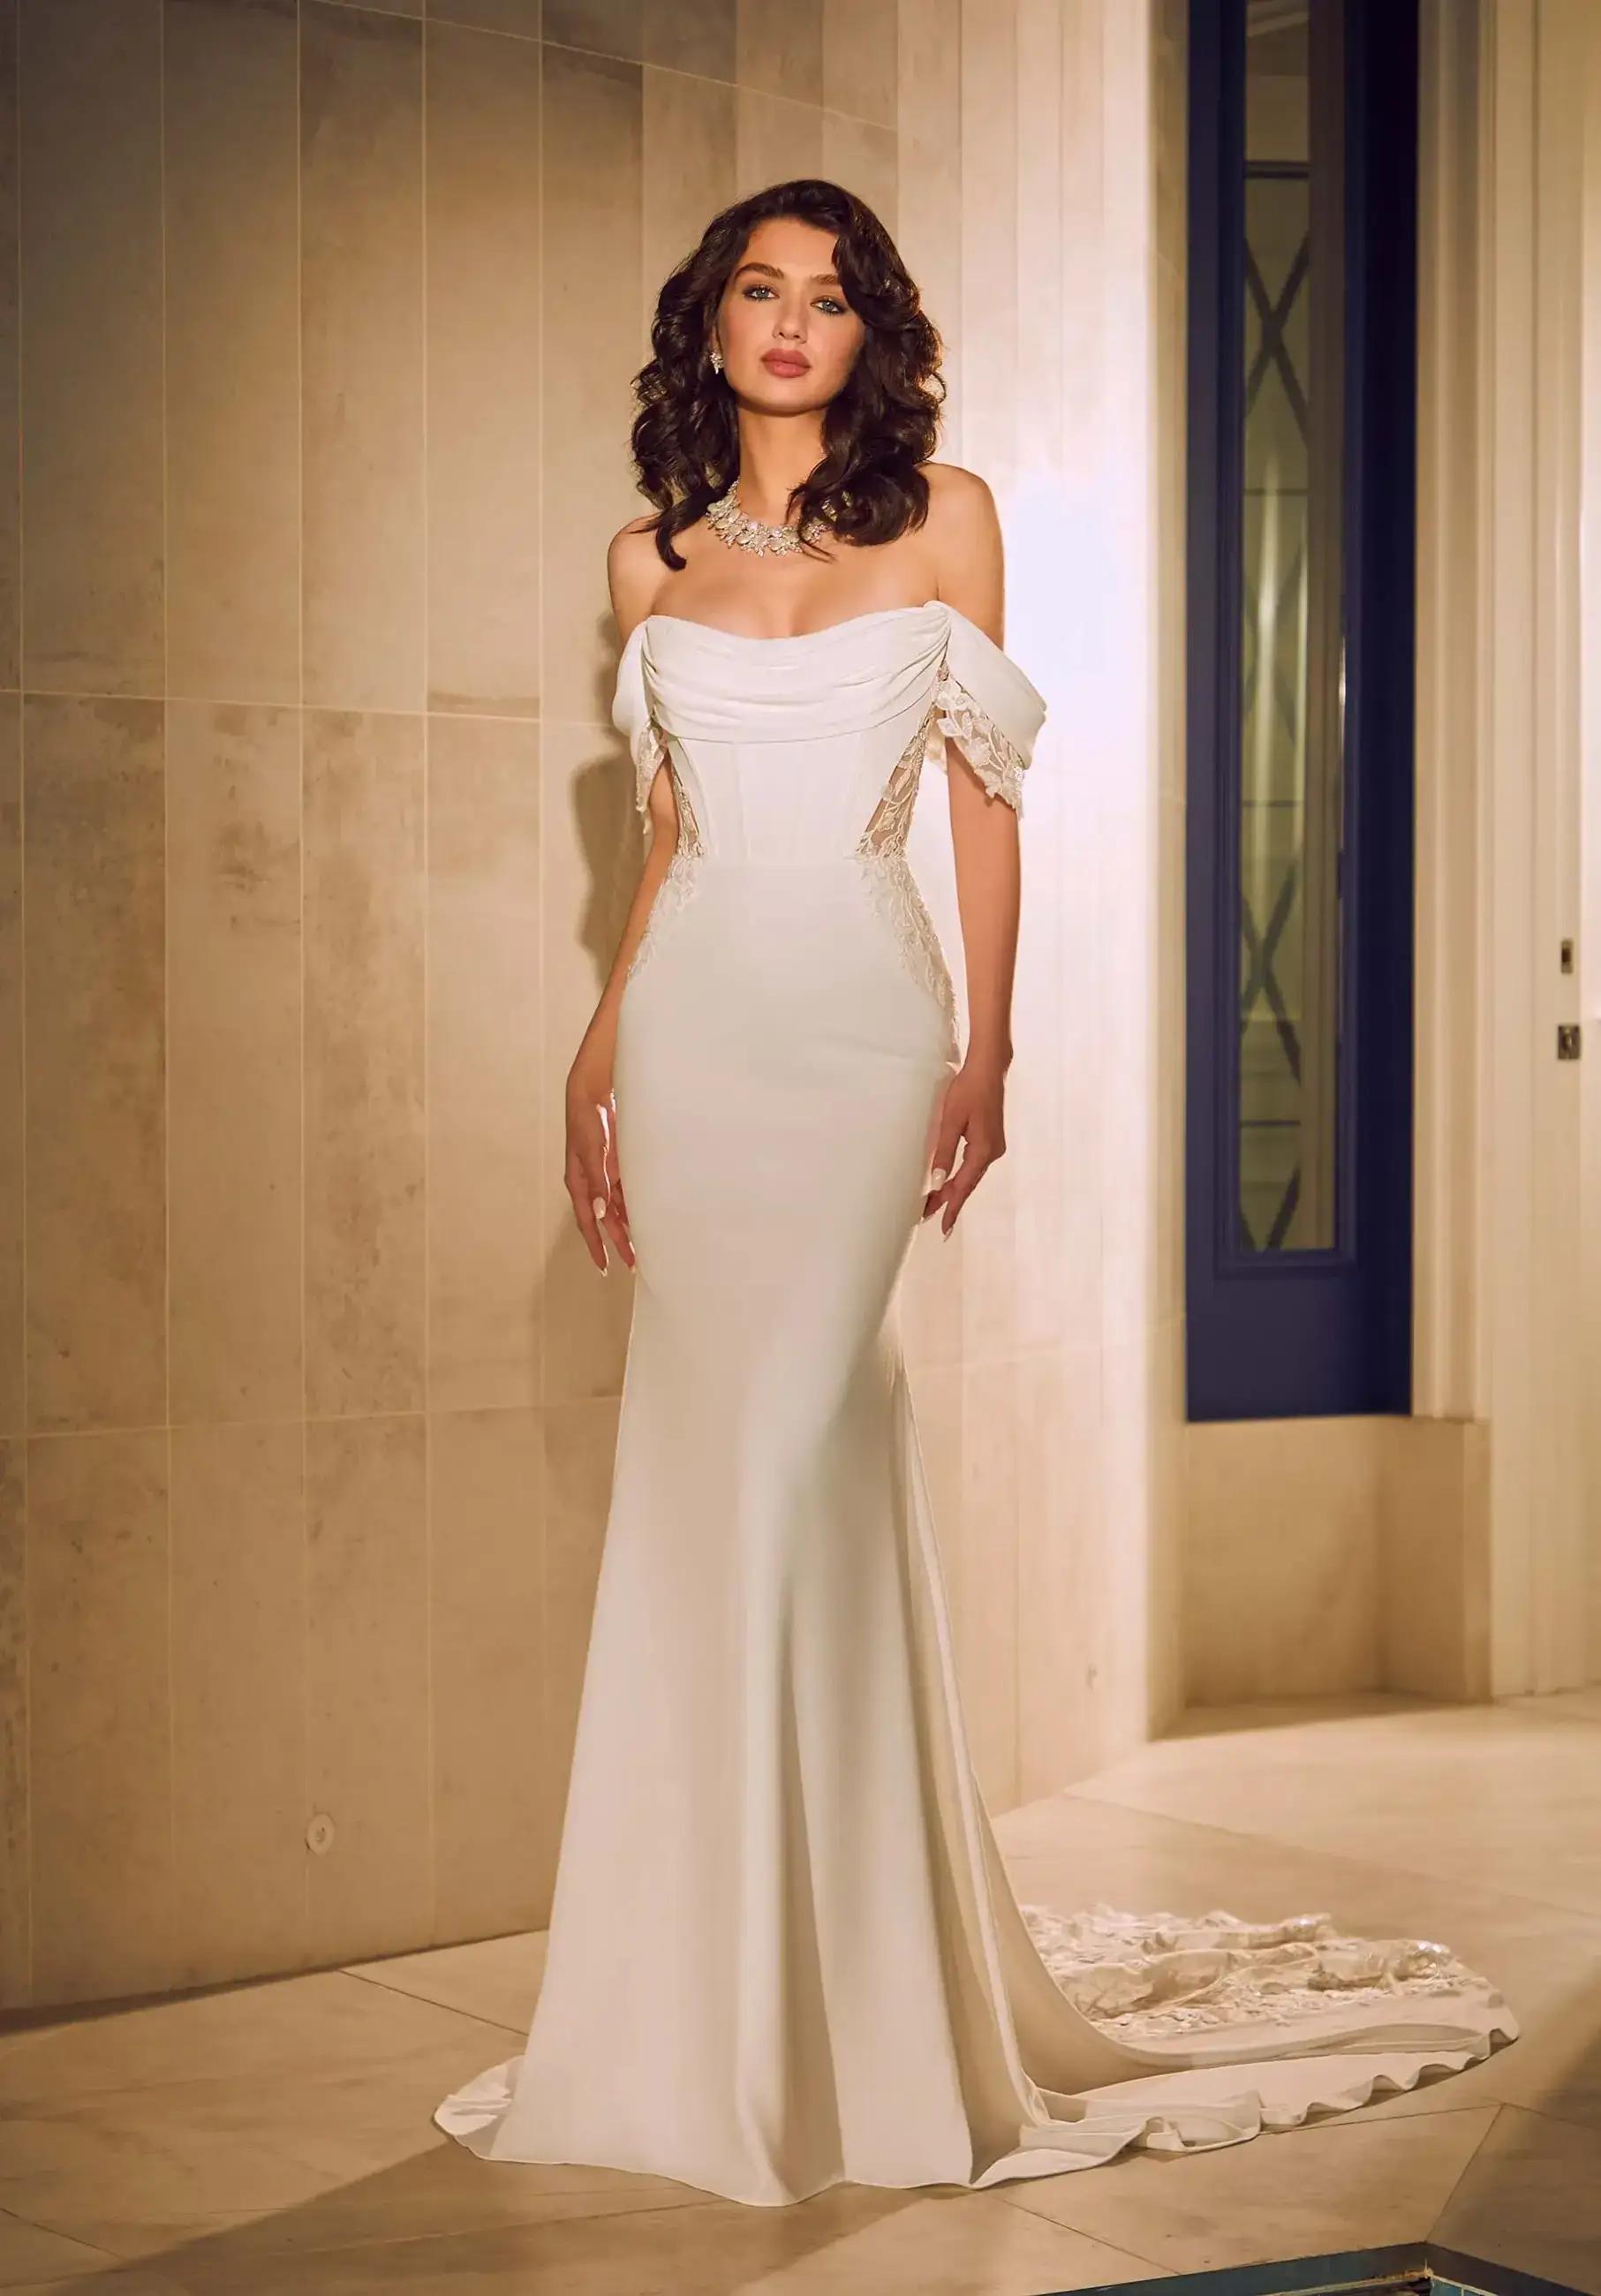 Model wearing a white gown by Amy&Eve